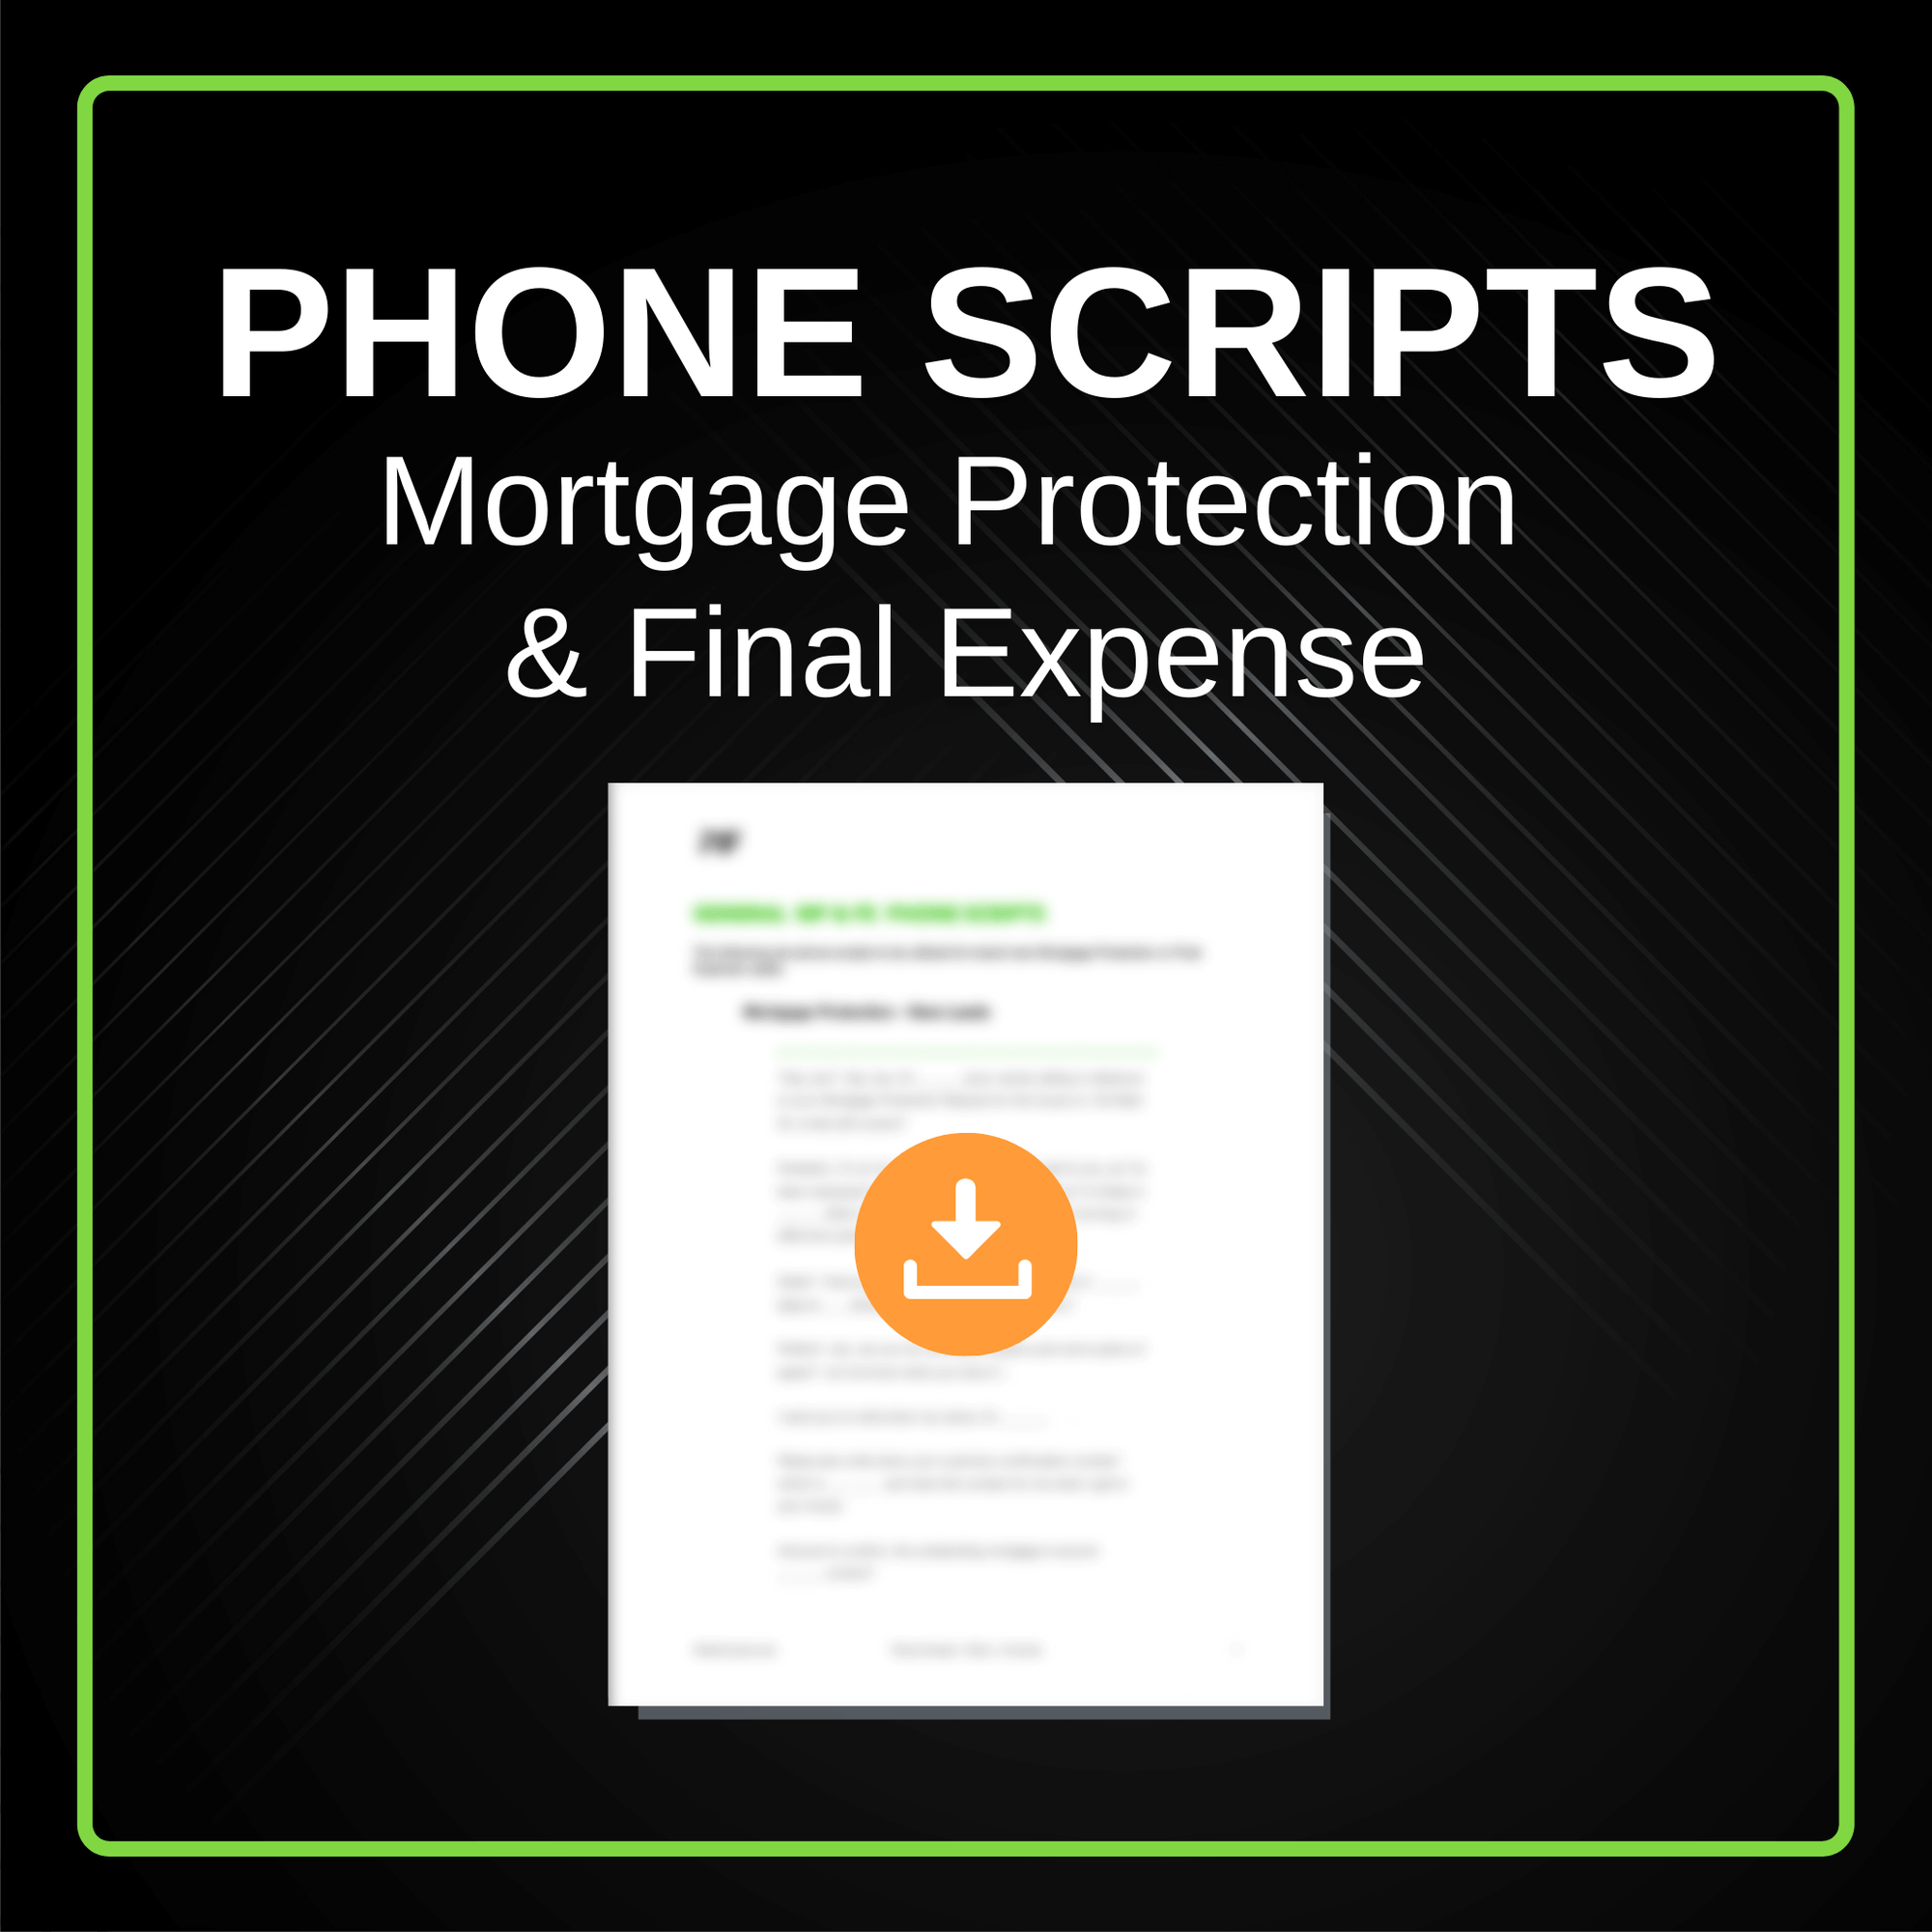 Phone Scripts: Mortgage Protection & Final Expense